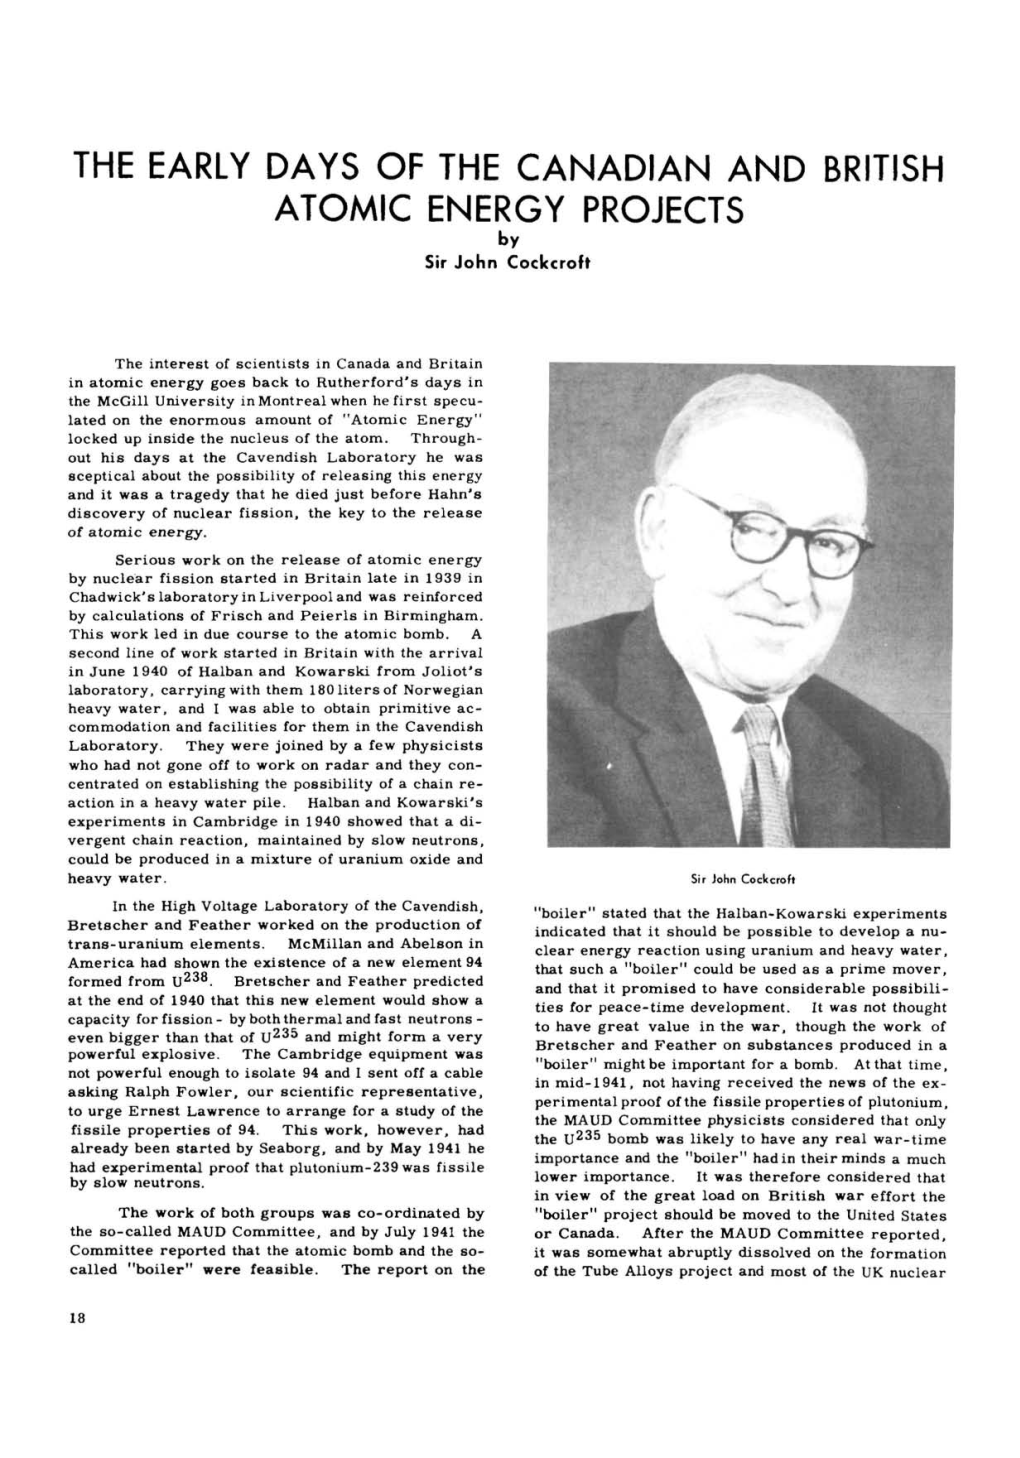 THE EARLY DAYS of the CANADIAN and BRITISH ATOMIC ENERGY PROJECTS by Sir John Coclccroft